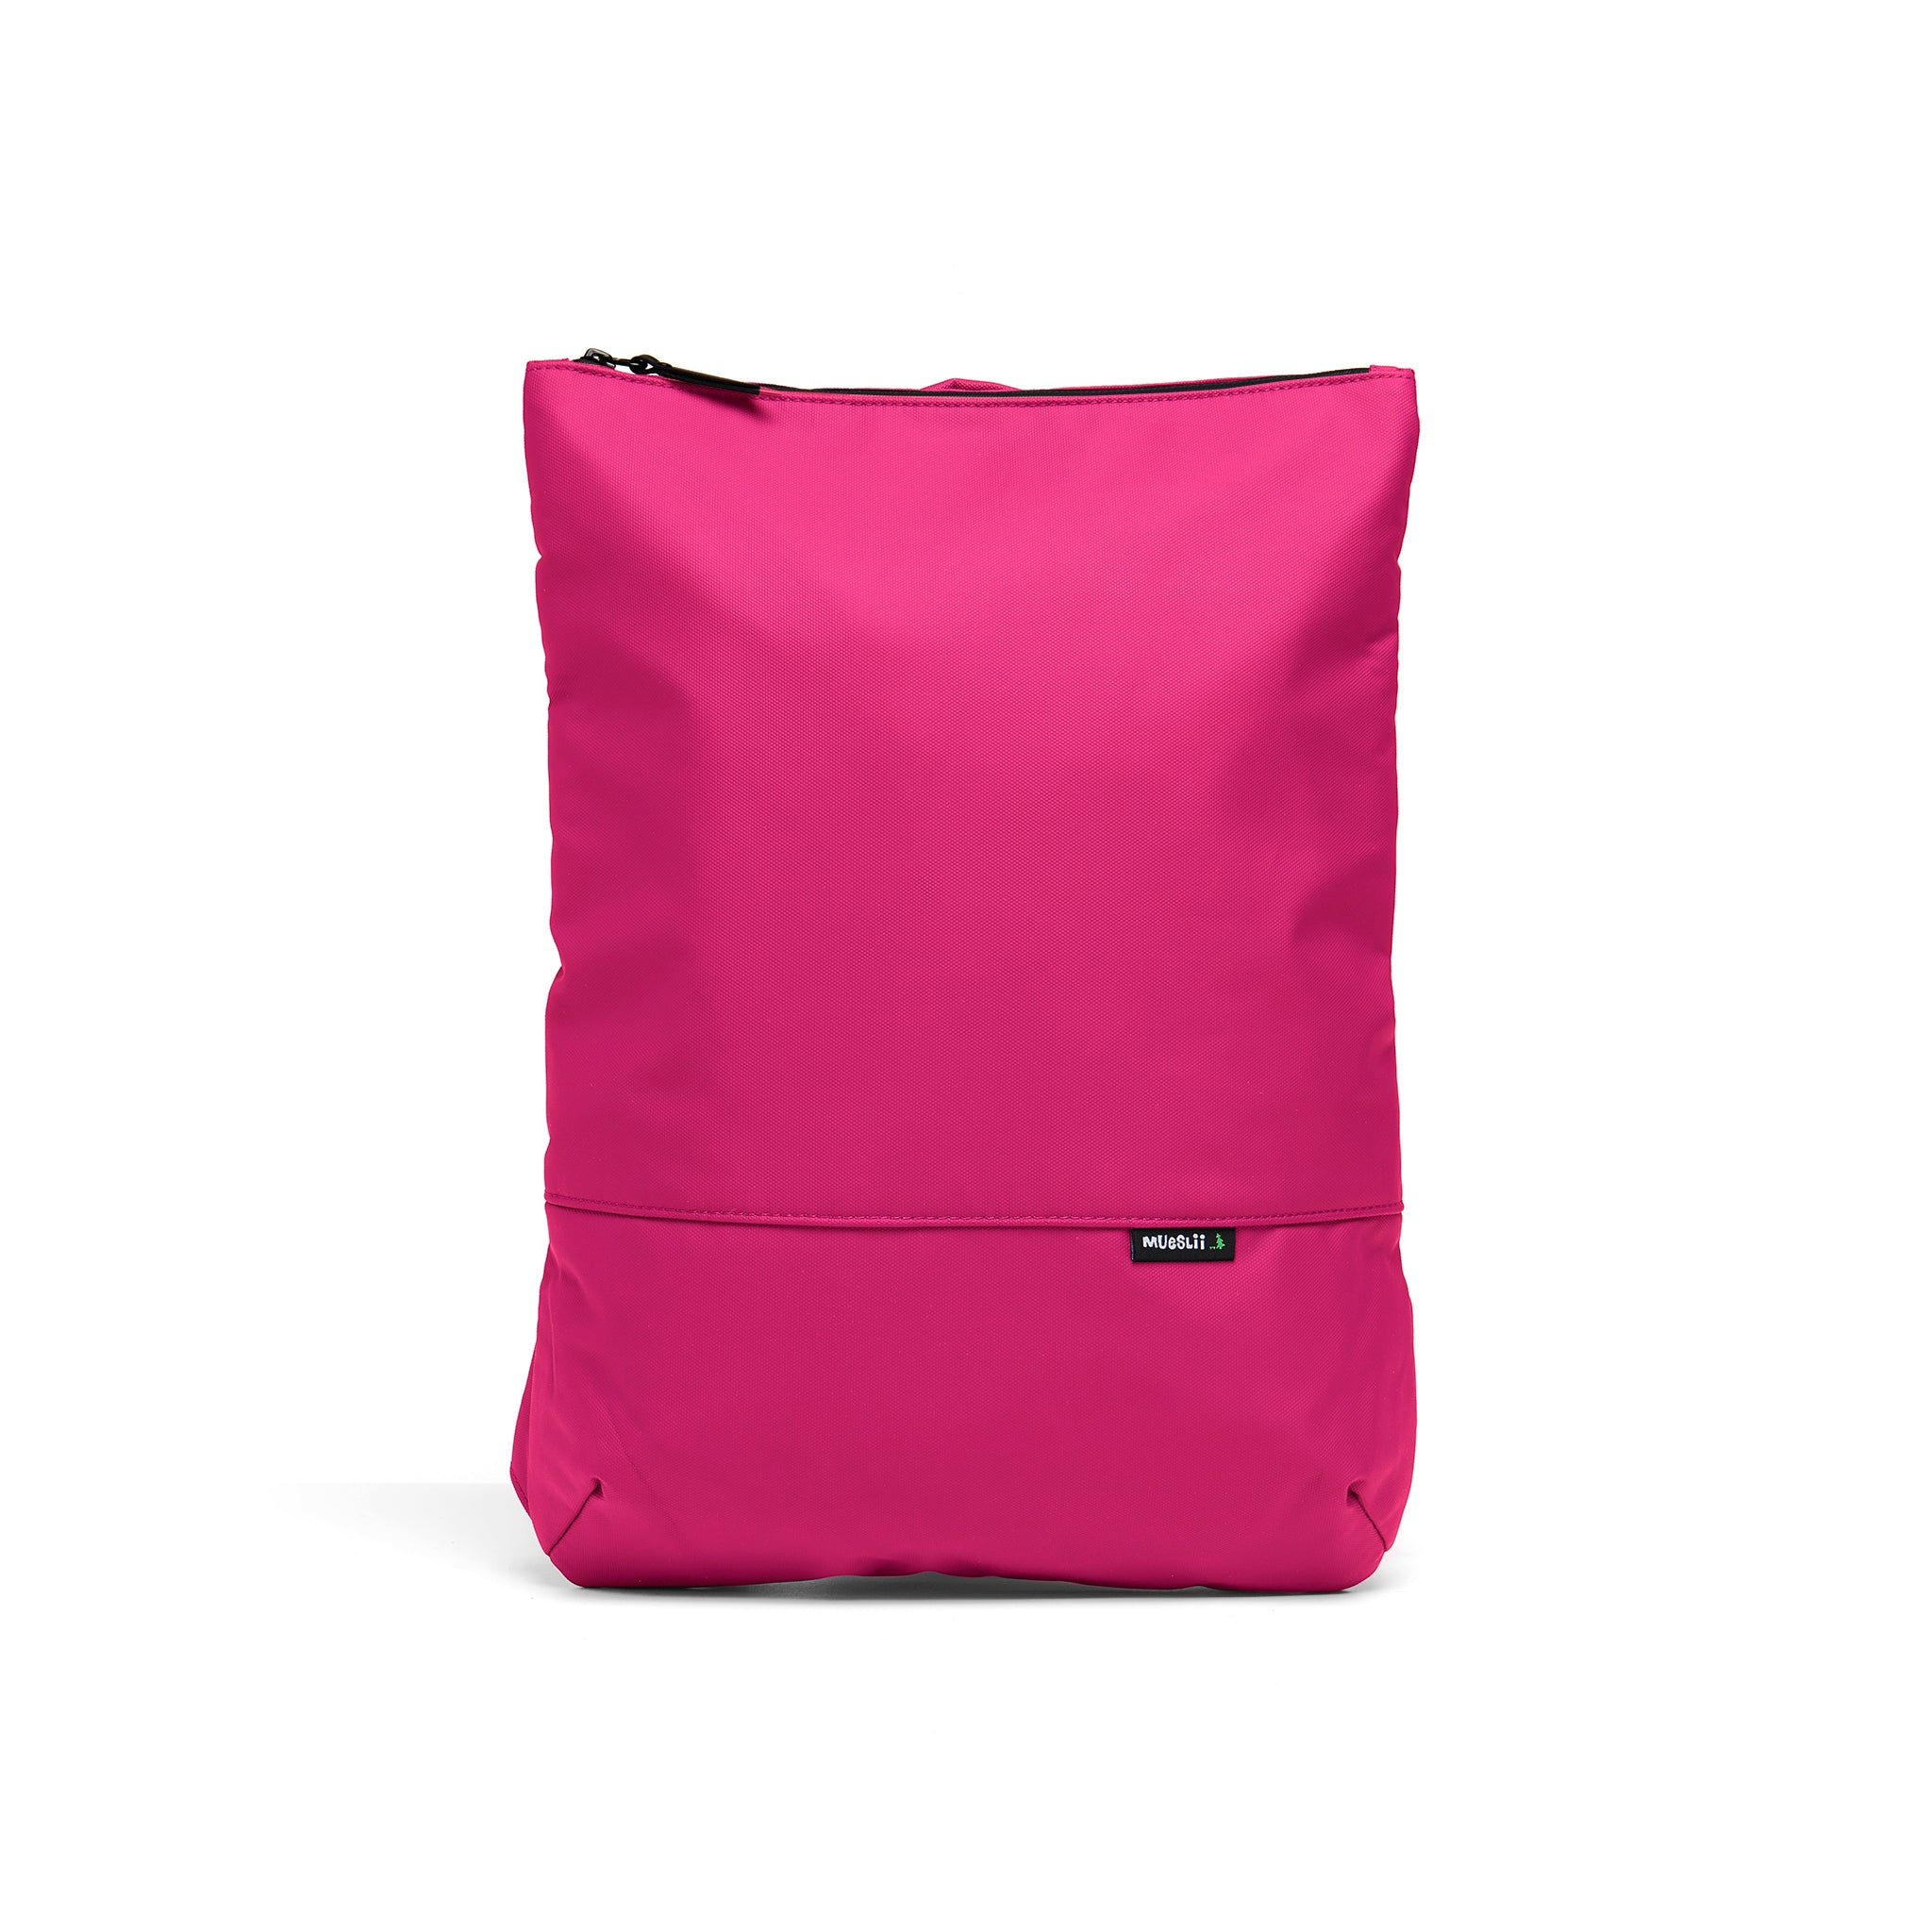 Mueslii light pack,  made of PU coated waterproof nylon, color pink, front view.